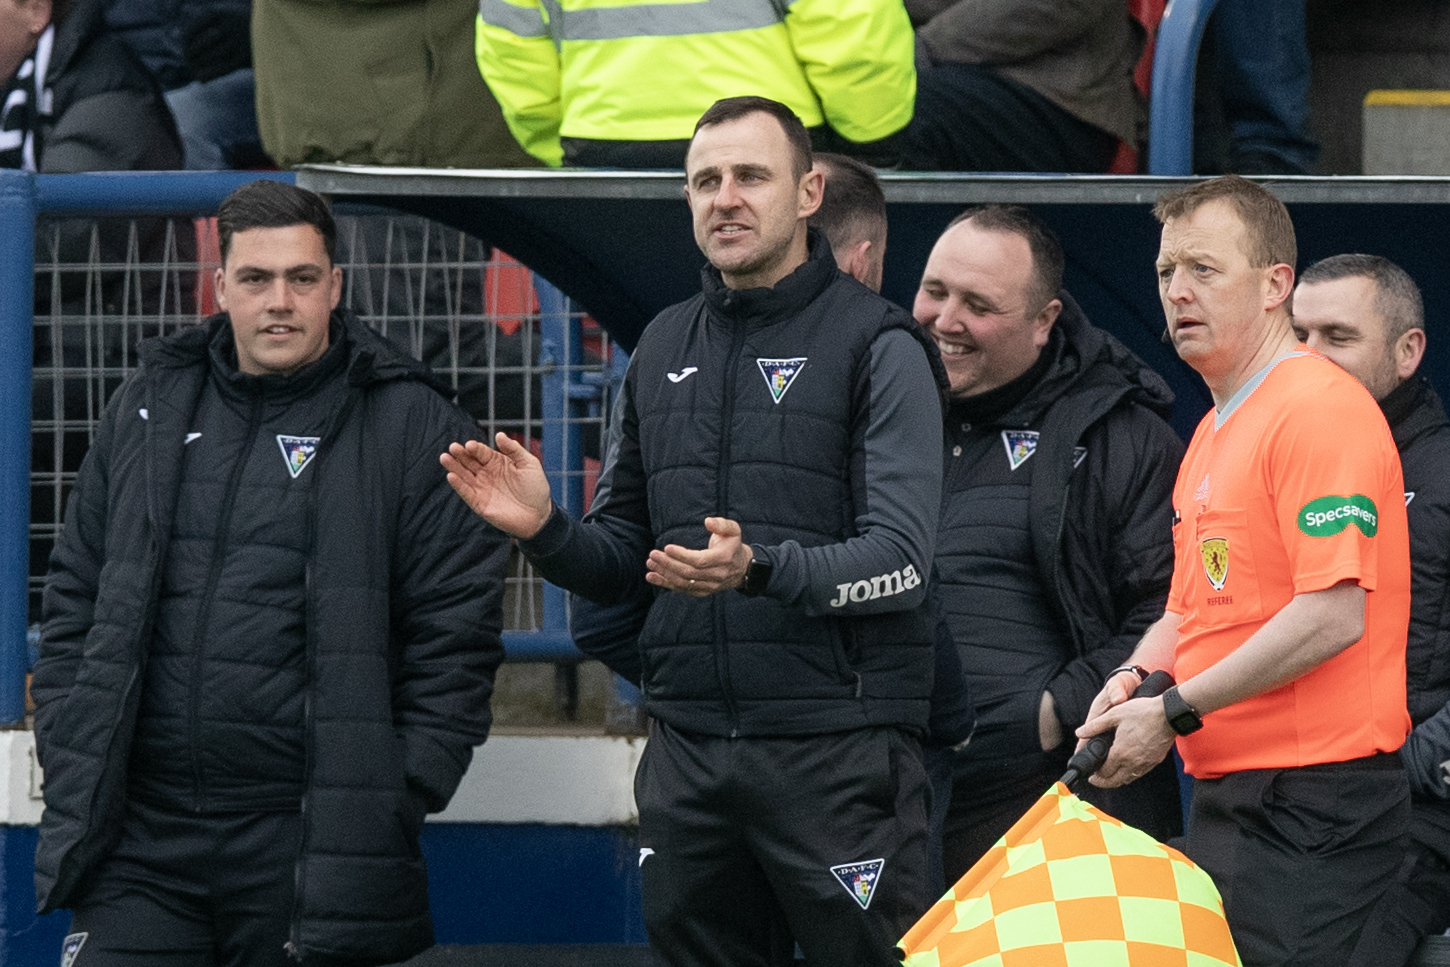 Dunfermline: Dave Mackay reflects on League One title and trophy lift